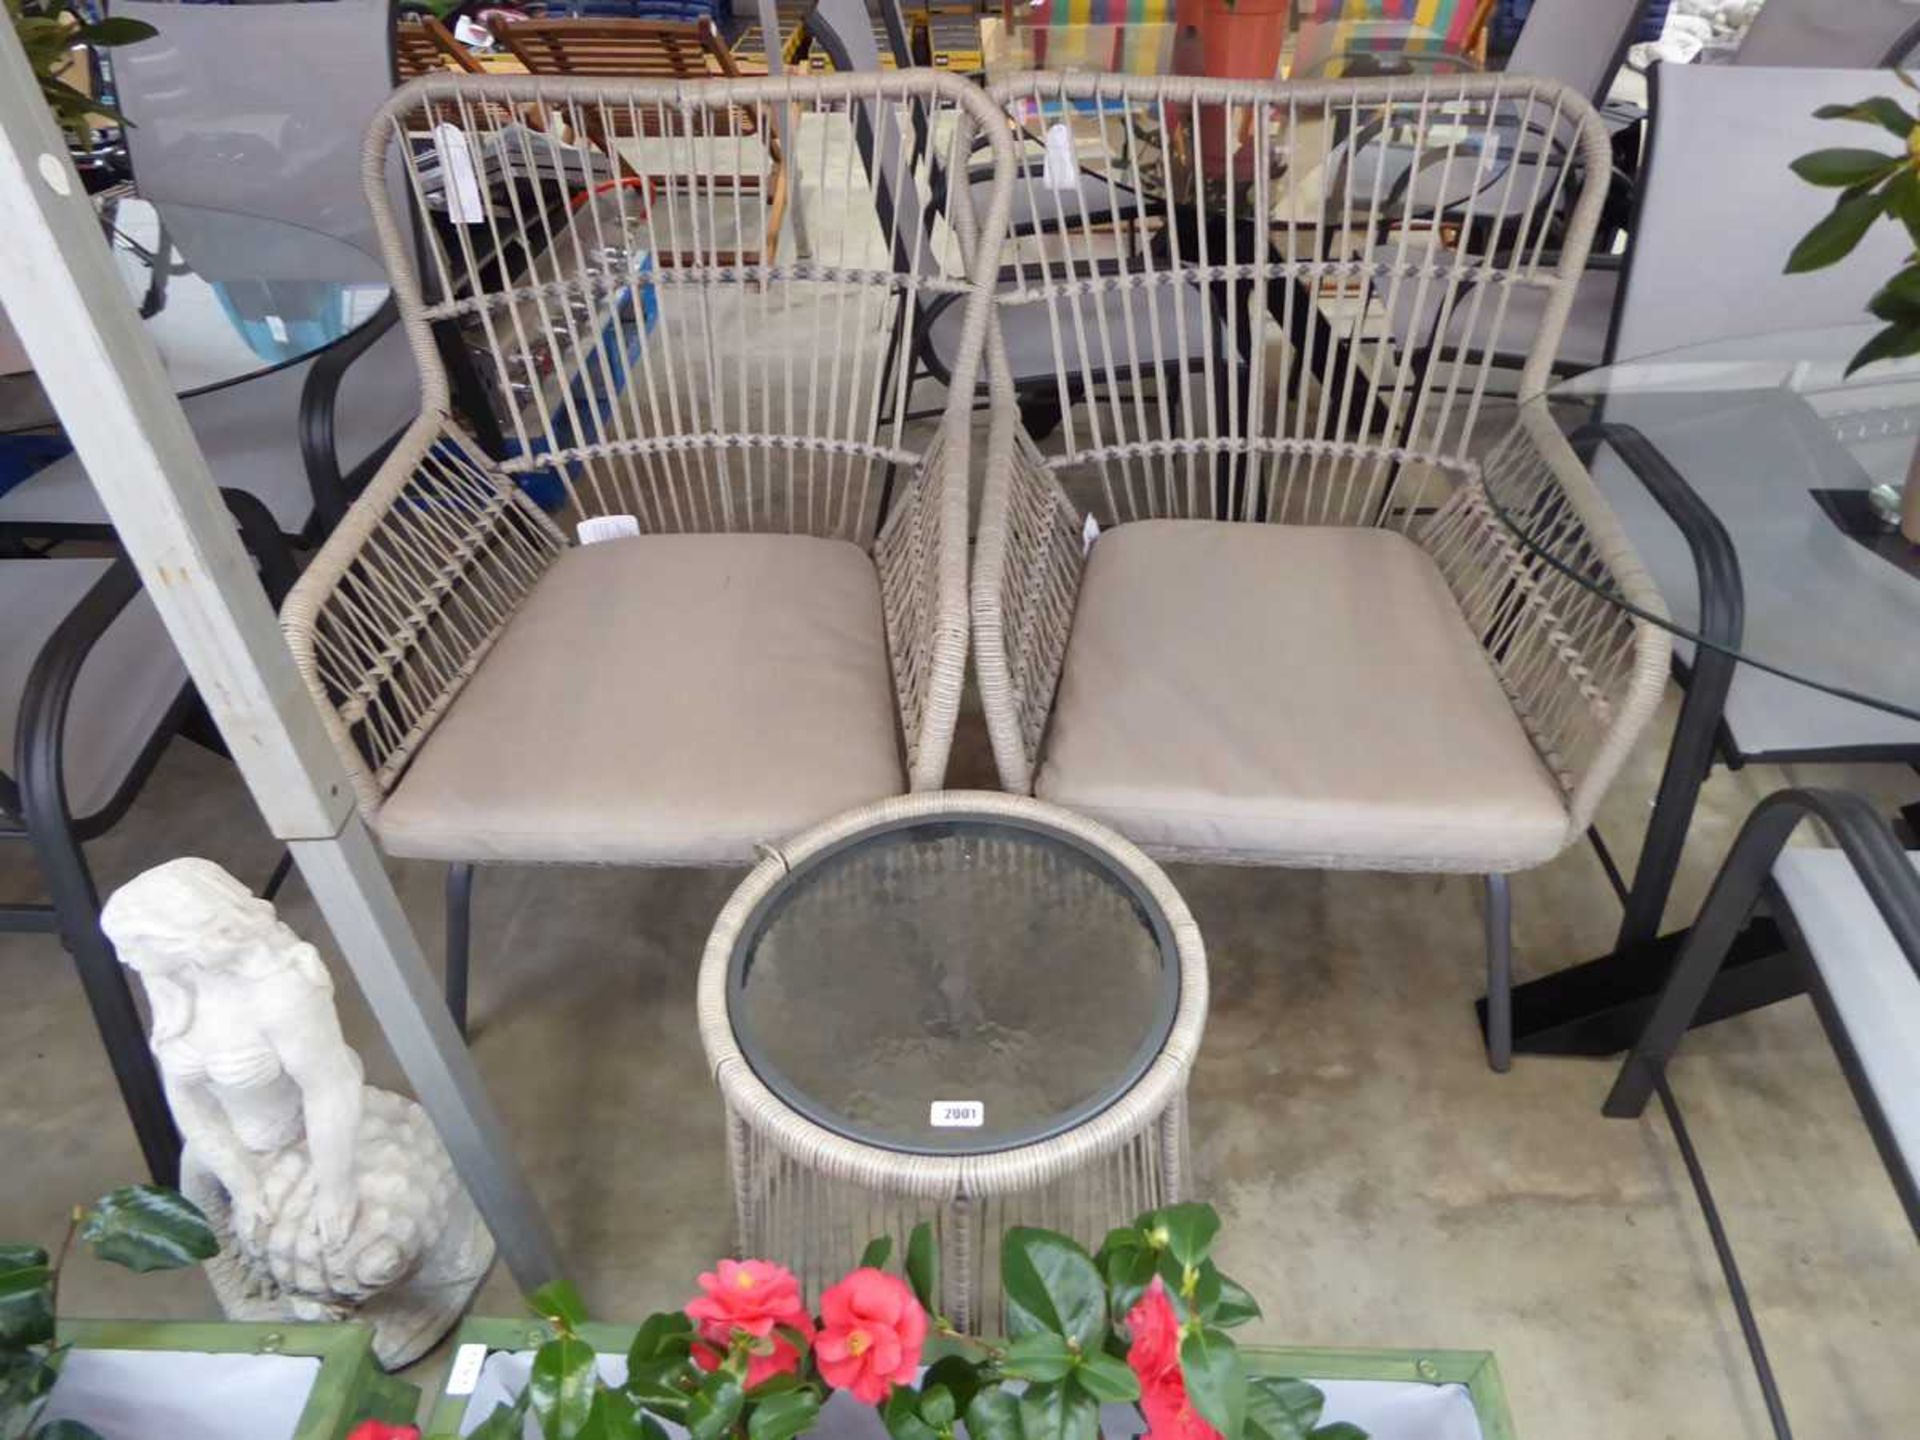 Cream rope effect outdoor 3 piece bistro set comprising 2 armchairs, each with matching cream